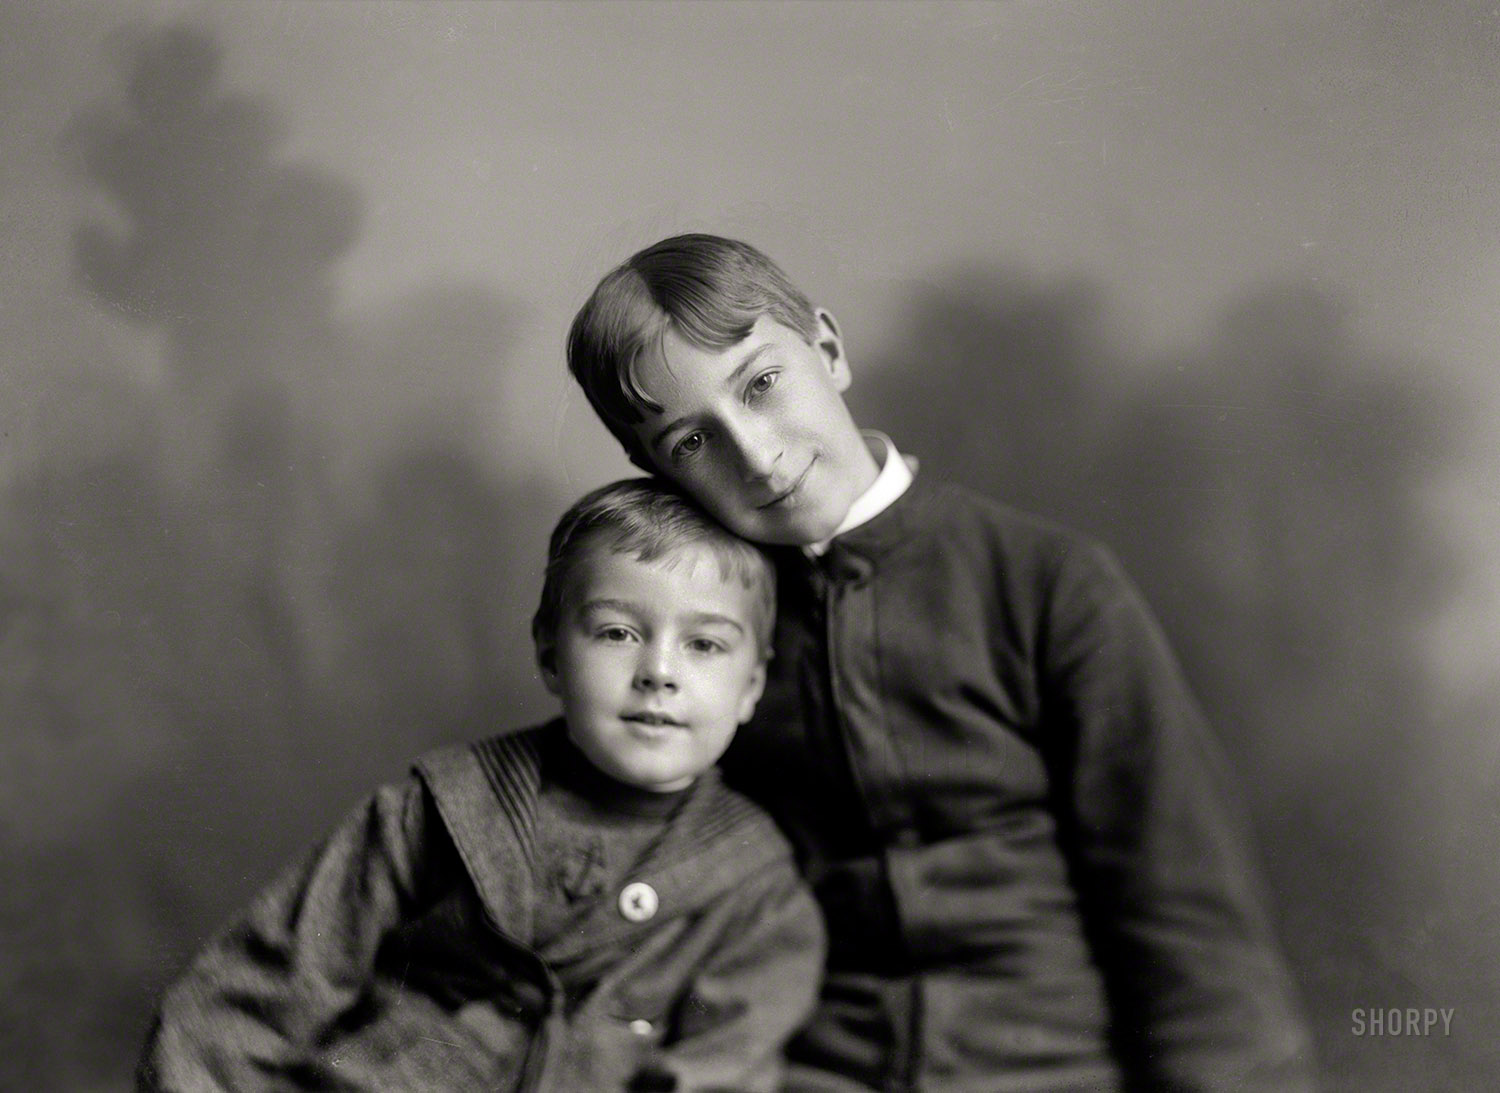 "Kelly, J.T. (children). Between February 1894 and February 1901." 5x7 glass negative from the C.M. Bell portrait studio in Washington, D.C. View full size.